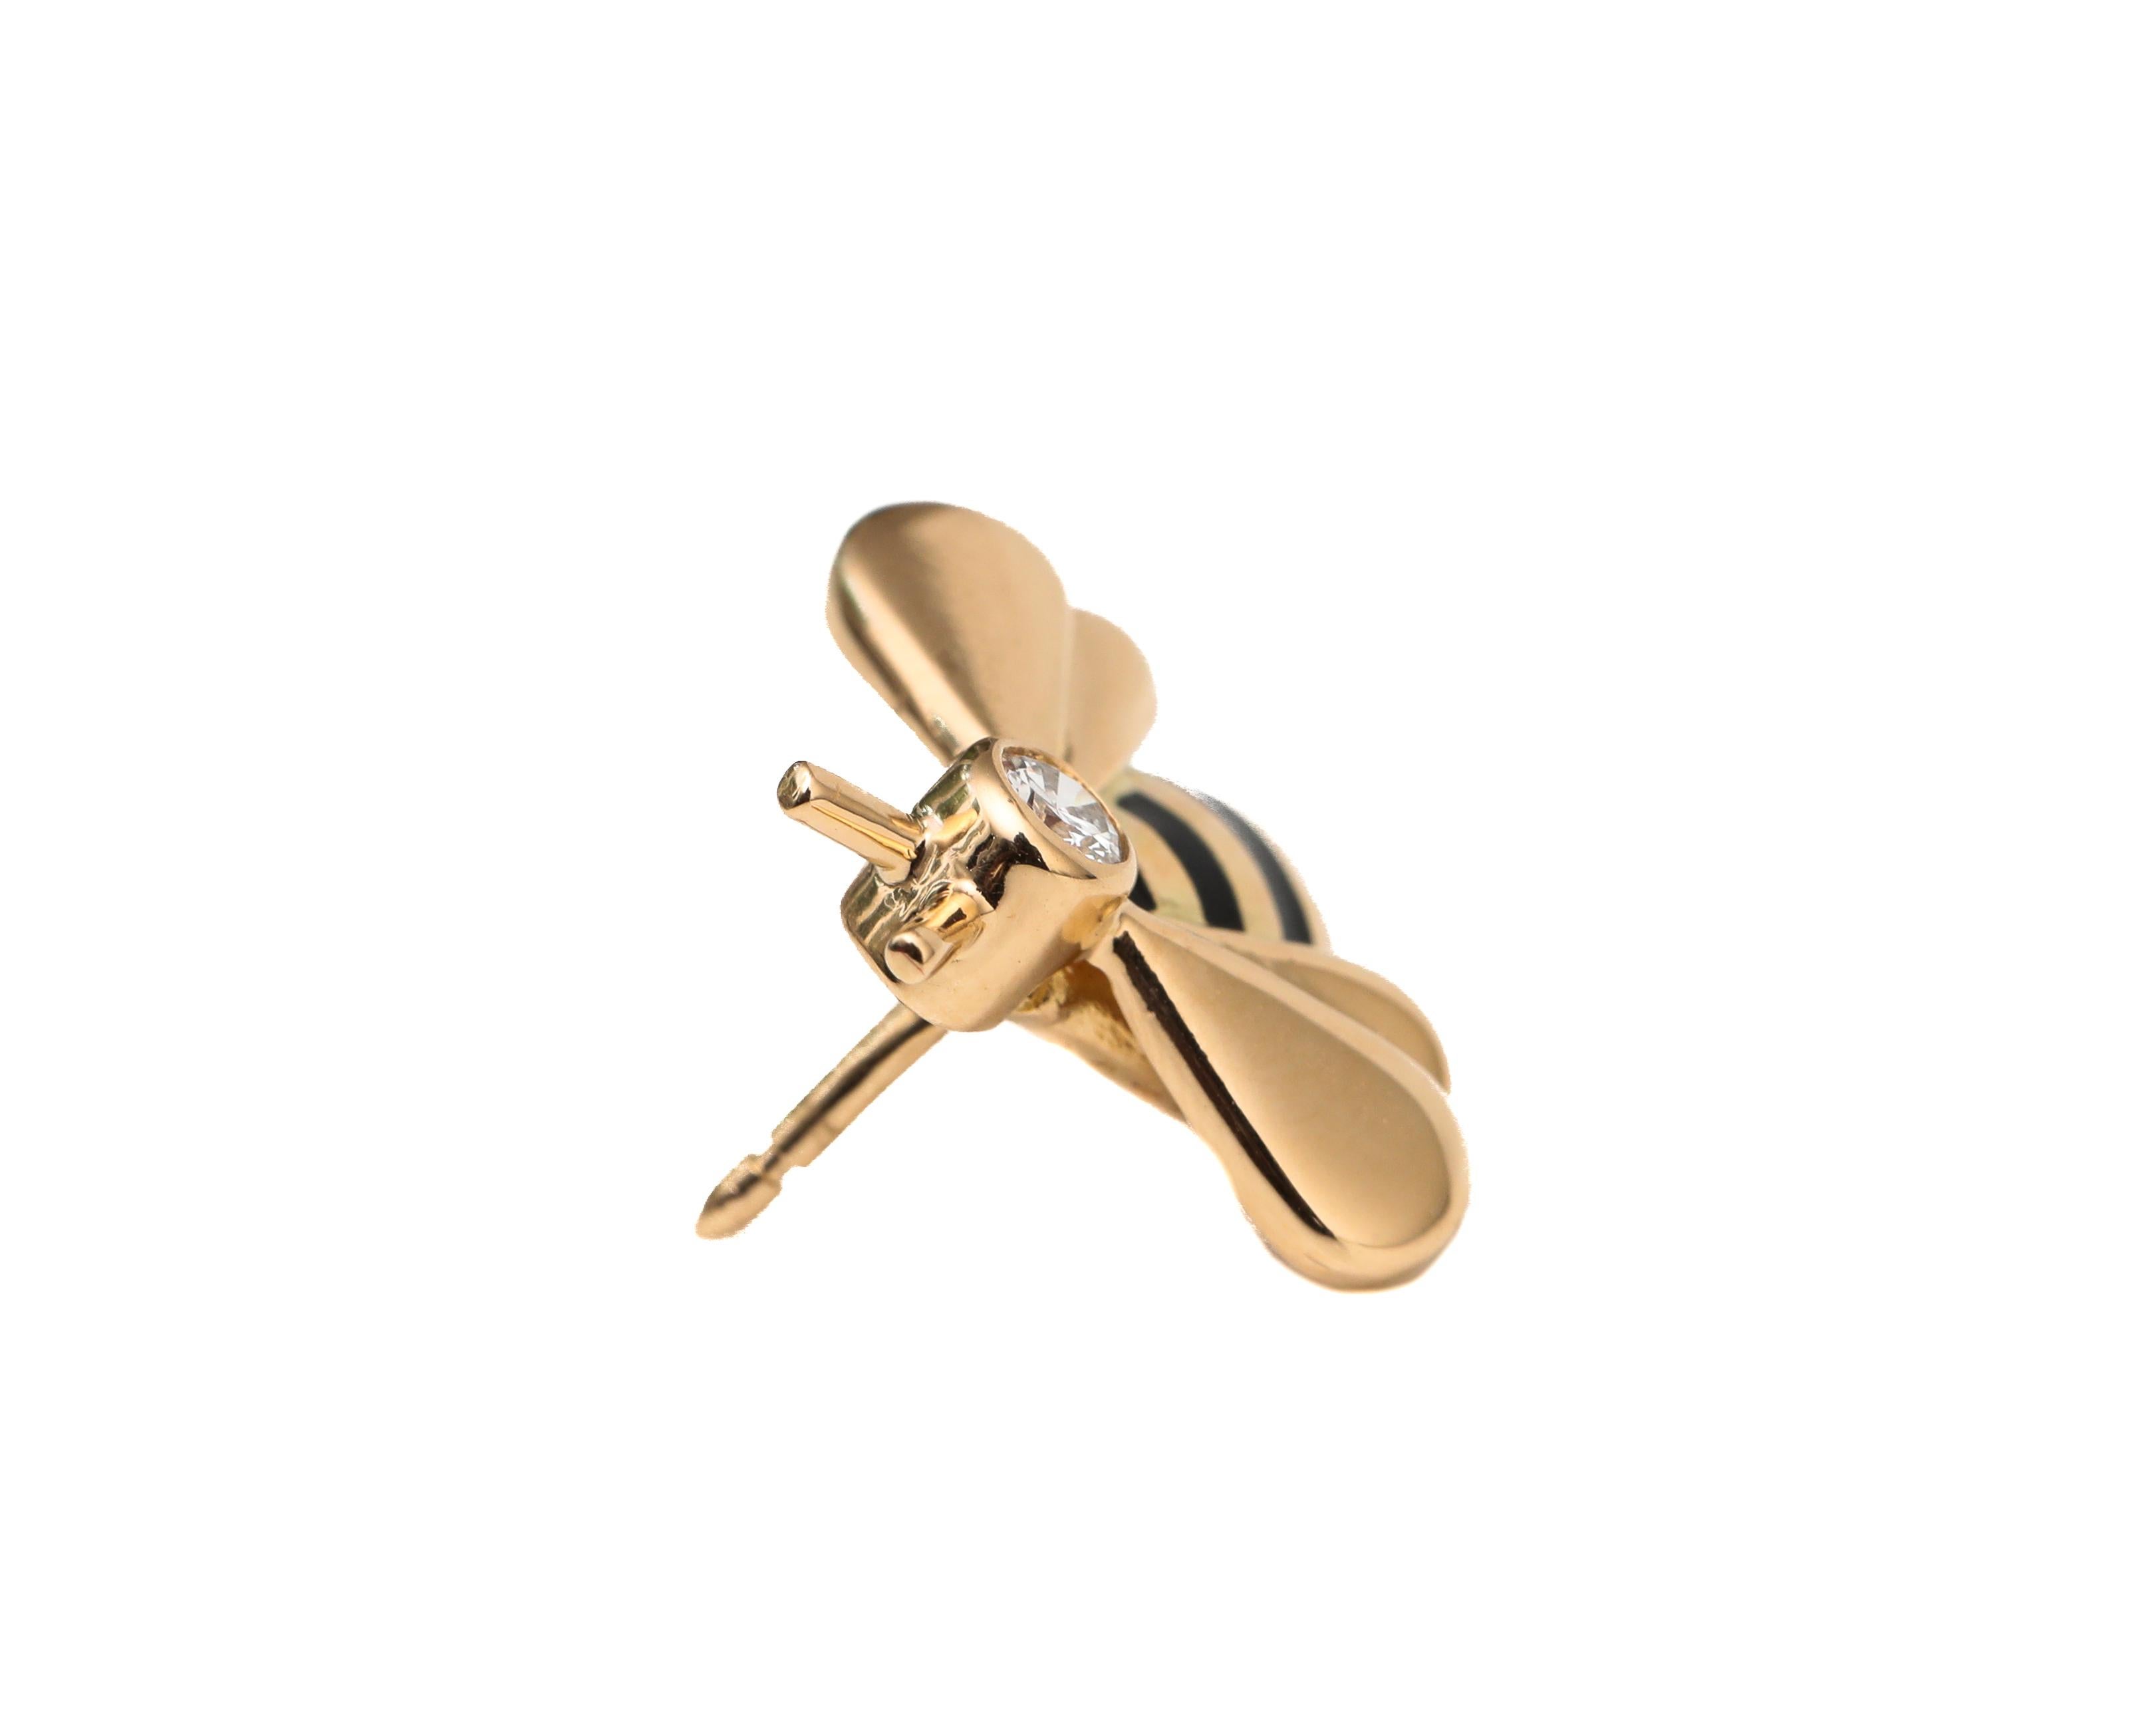 1990s Cartier Lapel Pin 
Bumble Bee
Crafted in 18 karat Yellow gold

Pin details:
Gold: 18 Karat Yellow Gold
Weight: 2.93 grams
Measures:

Features: 1 Diamond Accent 0.07 Carats, F color, VS clarity 
Mint Condition from the 1990s
Accompanied with a